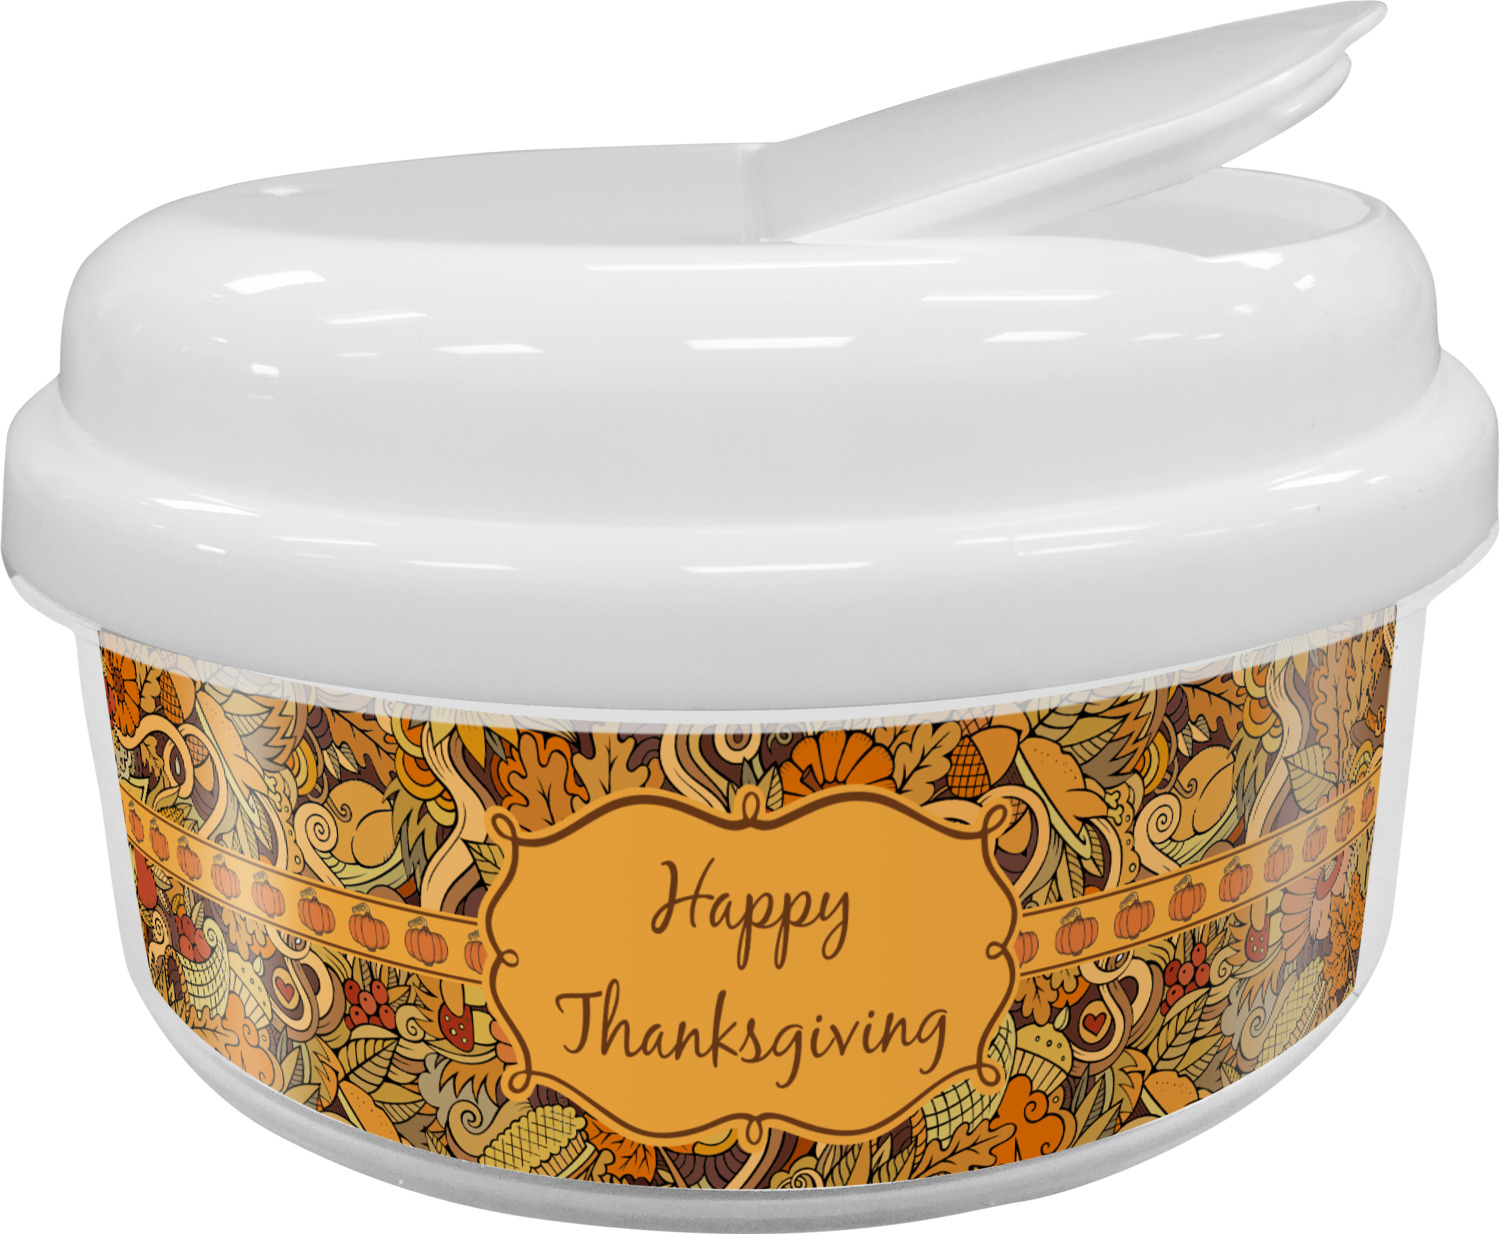 https://www.youcustomizeit.com/common/MAKE/512749/Thanksgiving-Snack-Container-Personalized.jpg?lm=1659776840